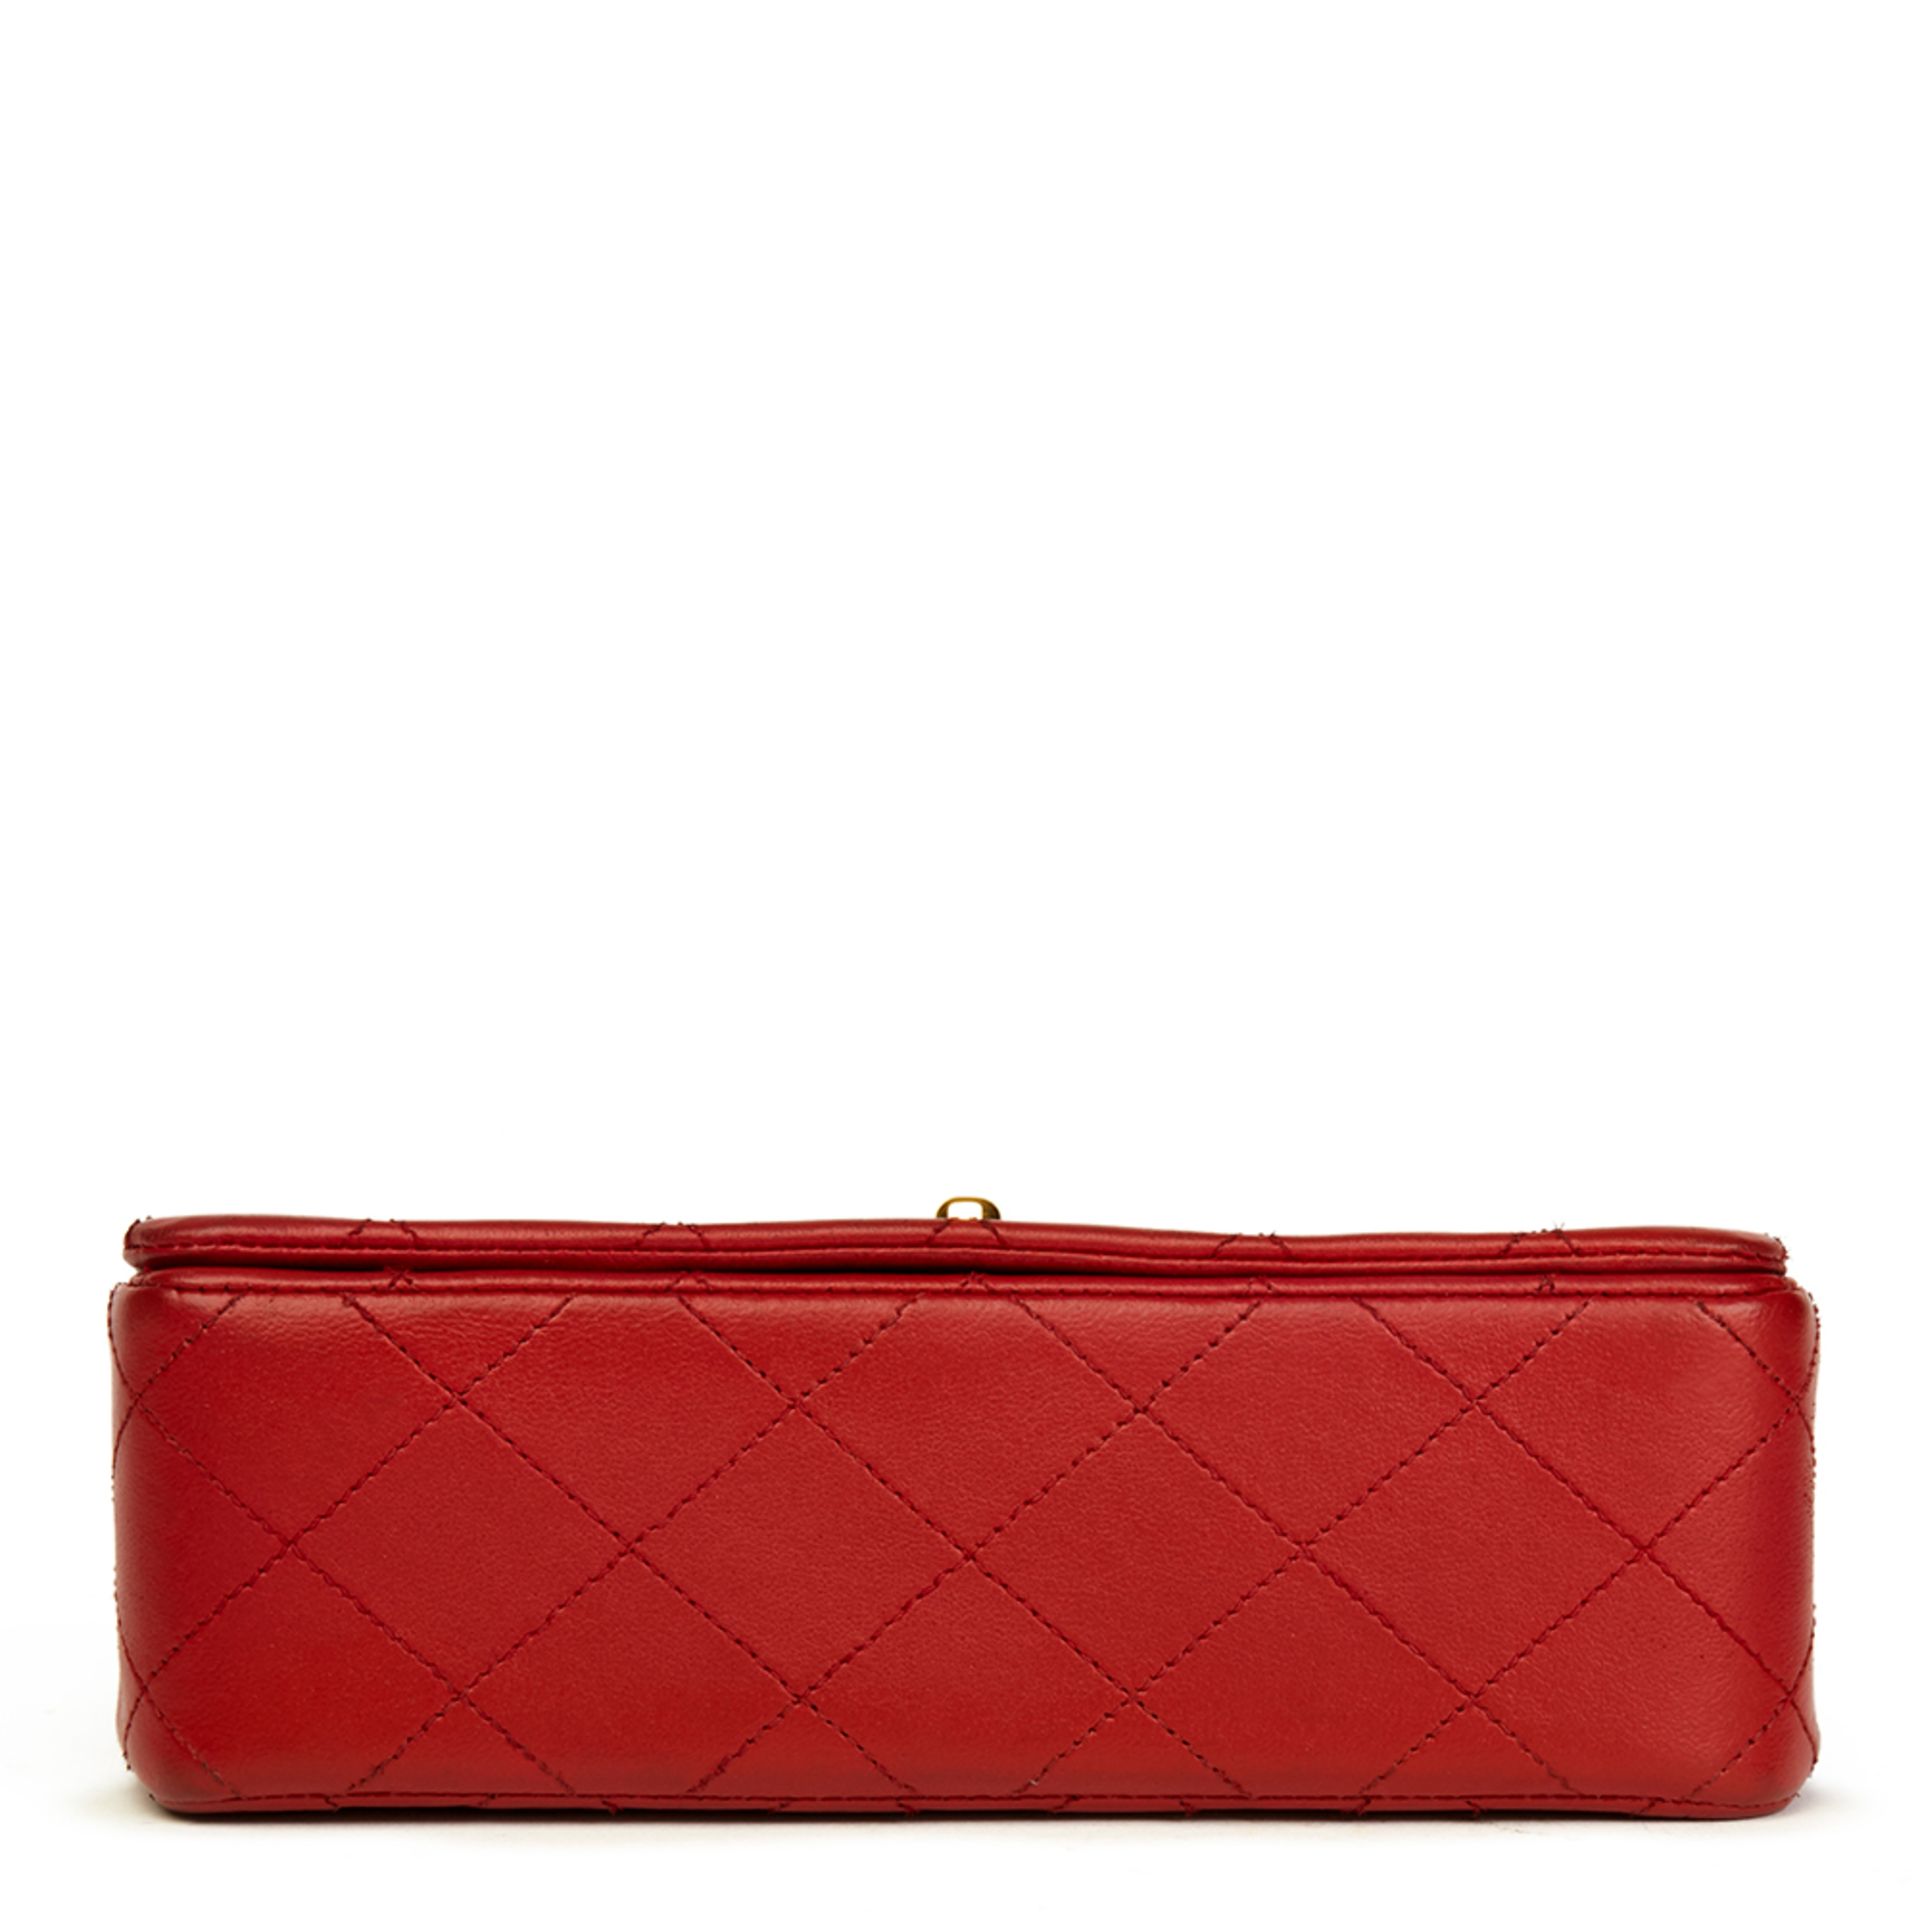 Chanel Red Quilted Lambskin Vintage Mini Flap Bag - Image 5 of 9